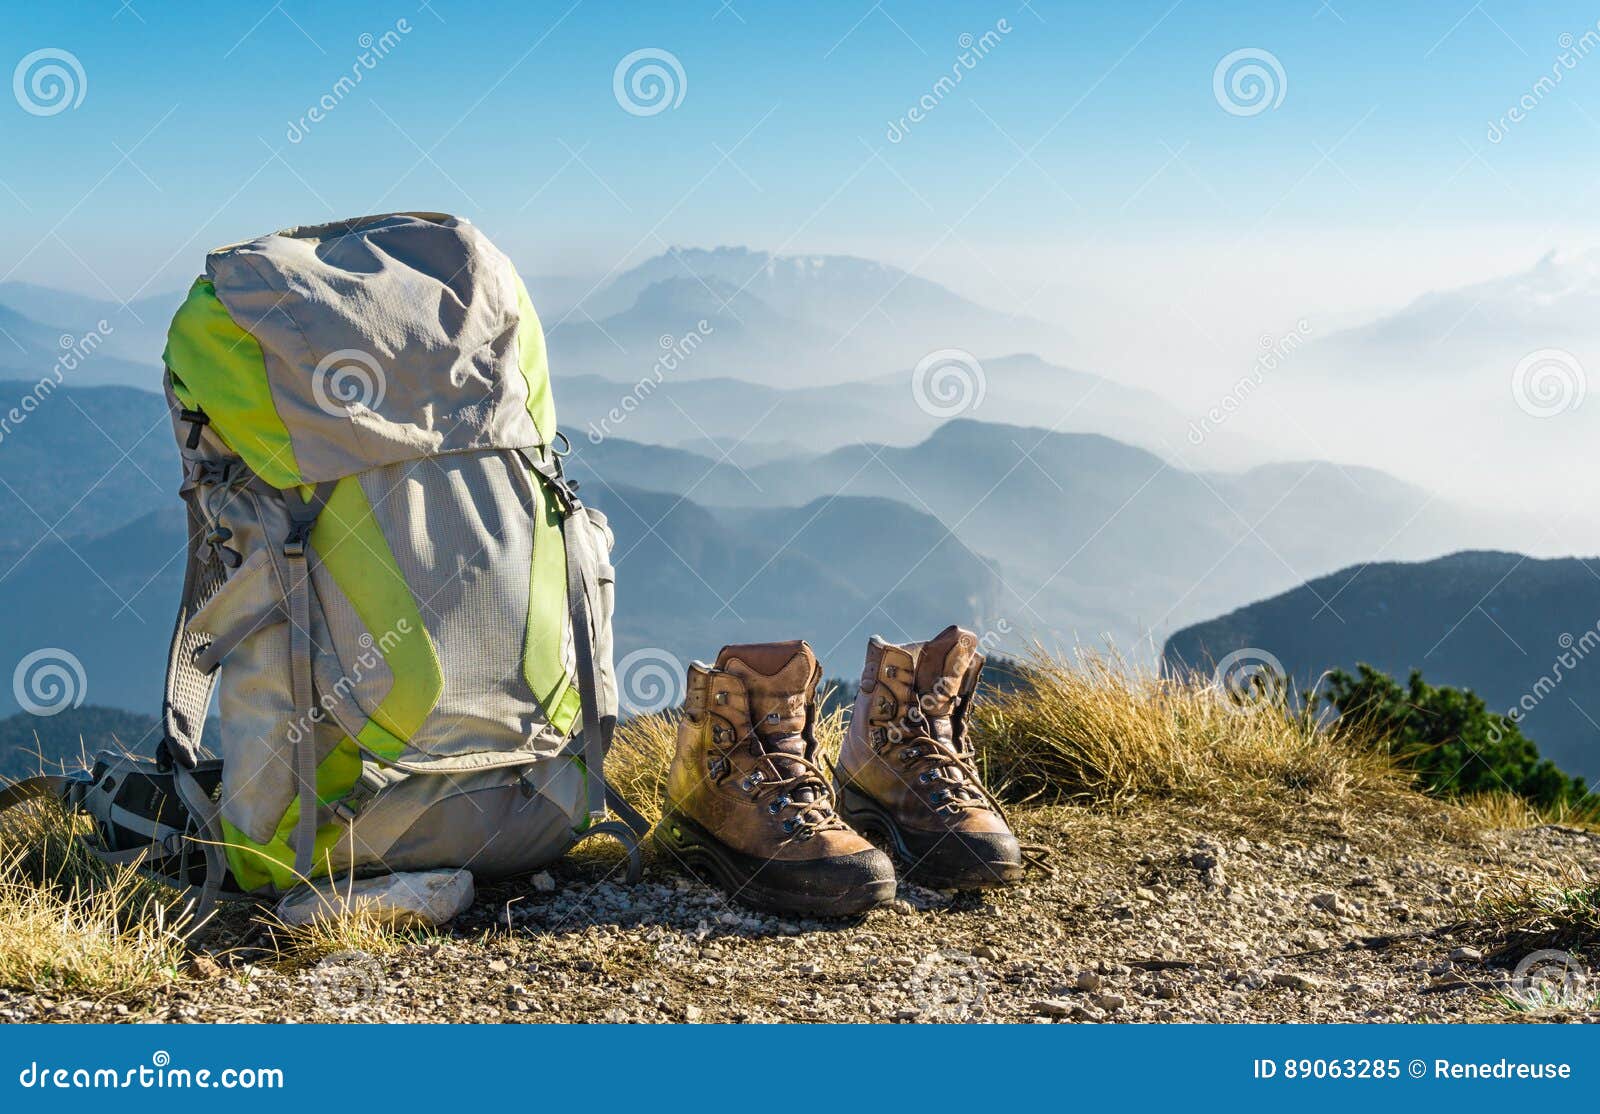 hiking equipment. backpack and boots on top of mountain.